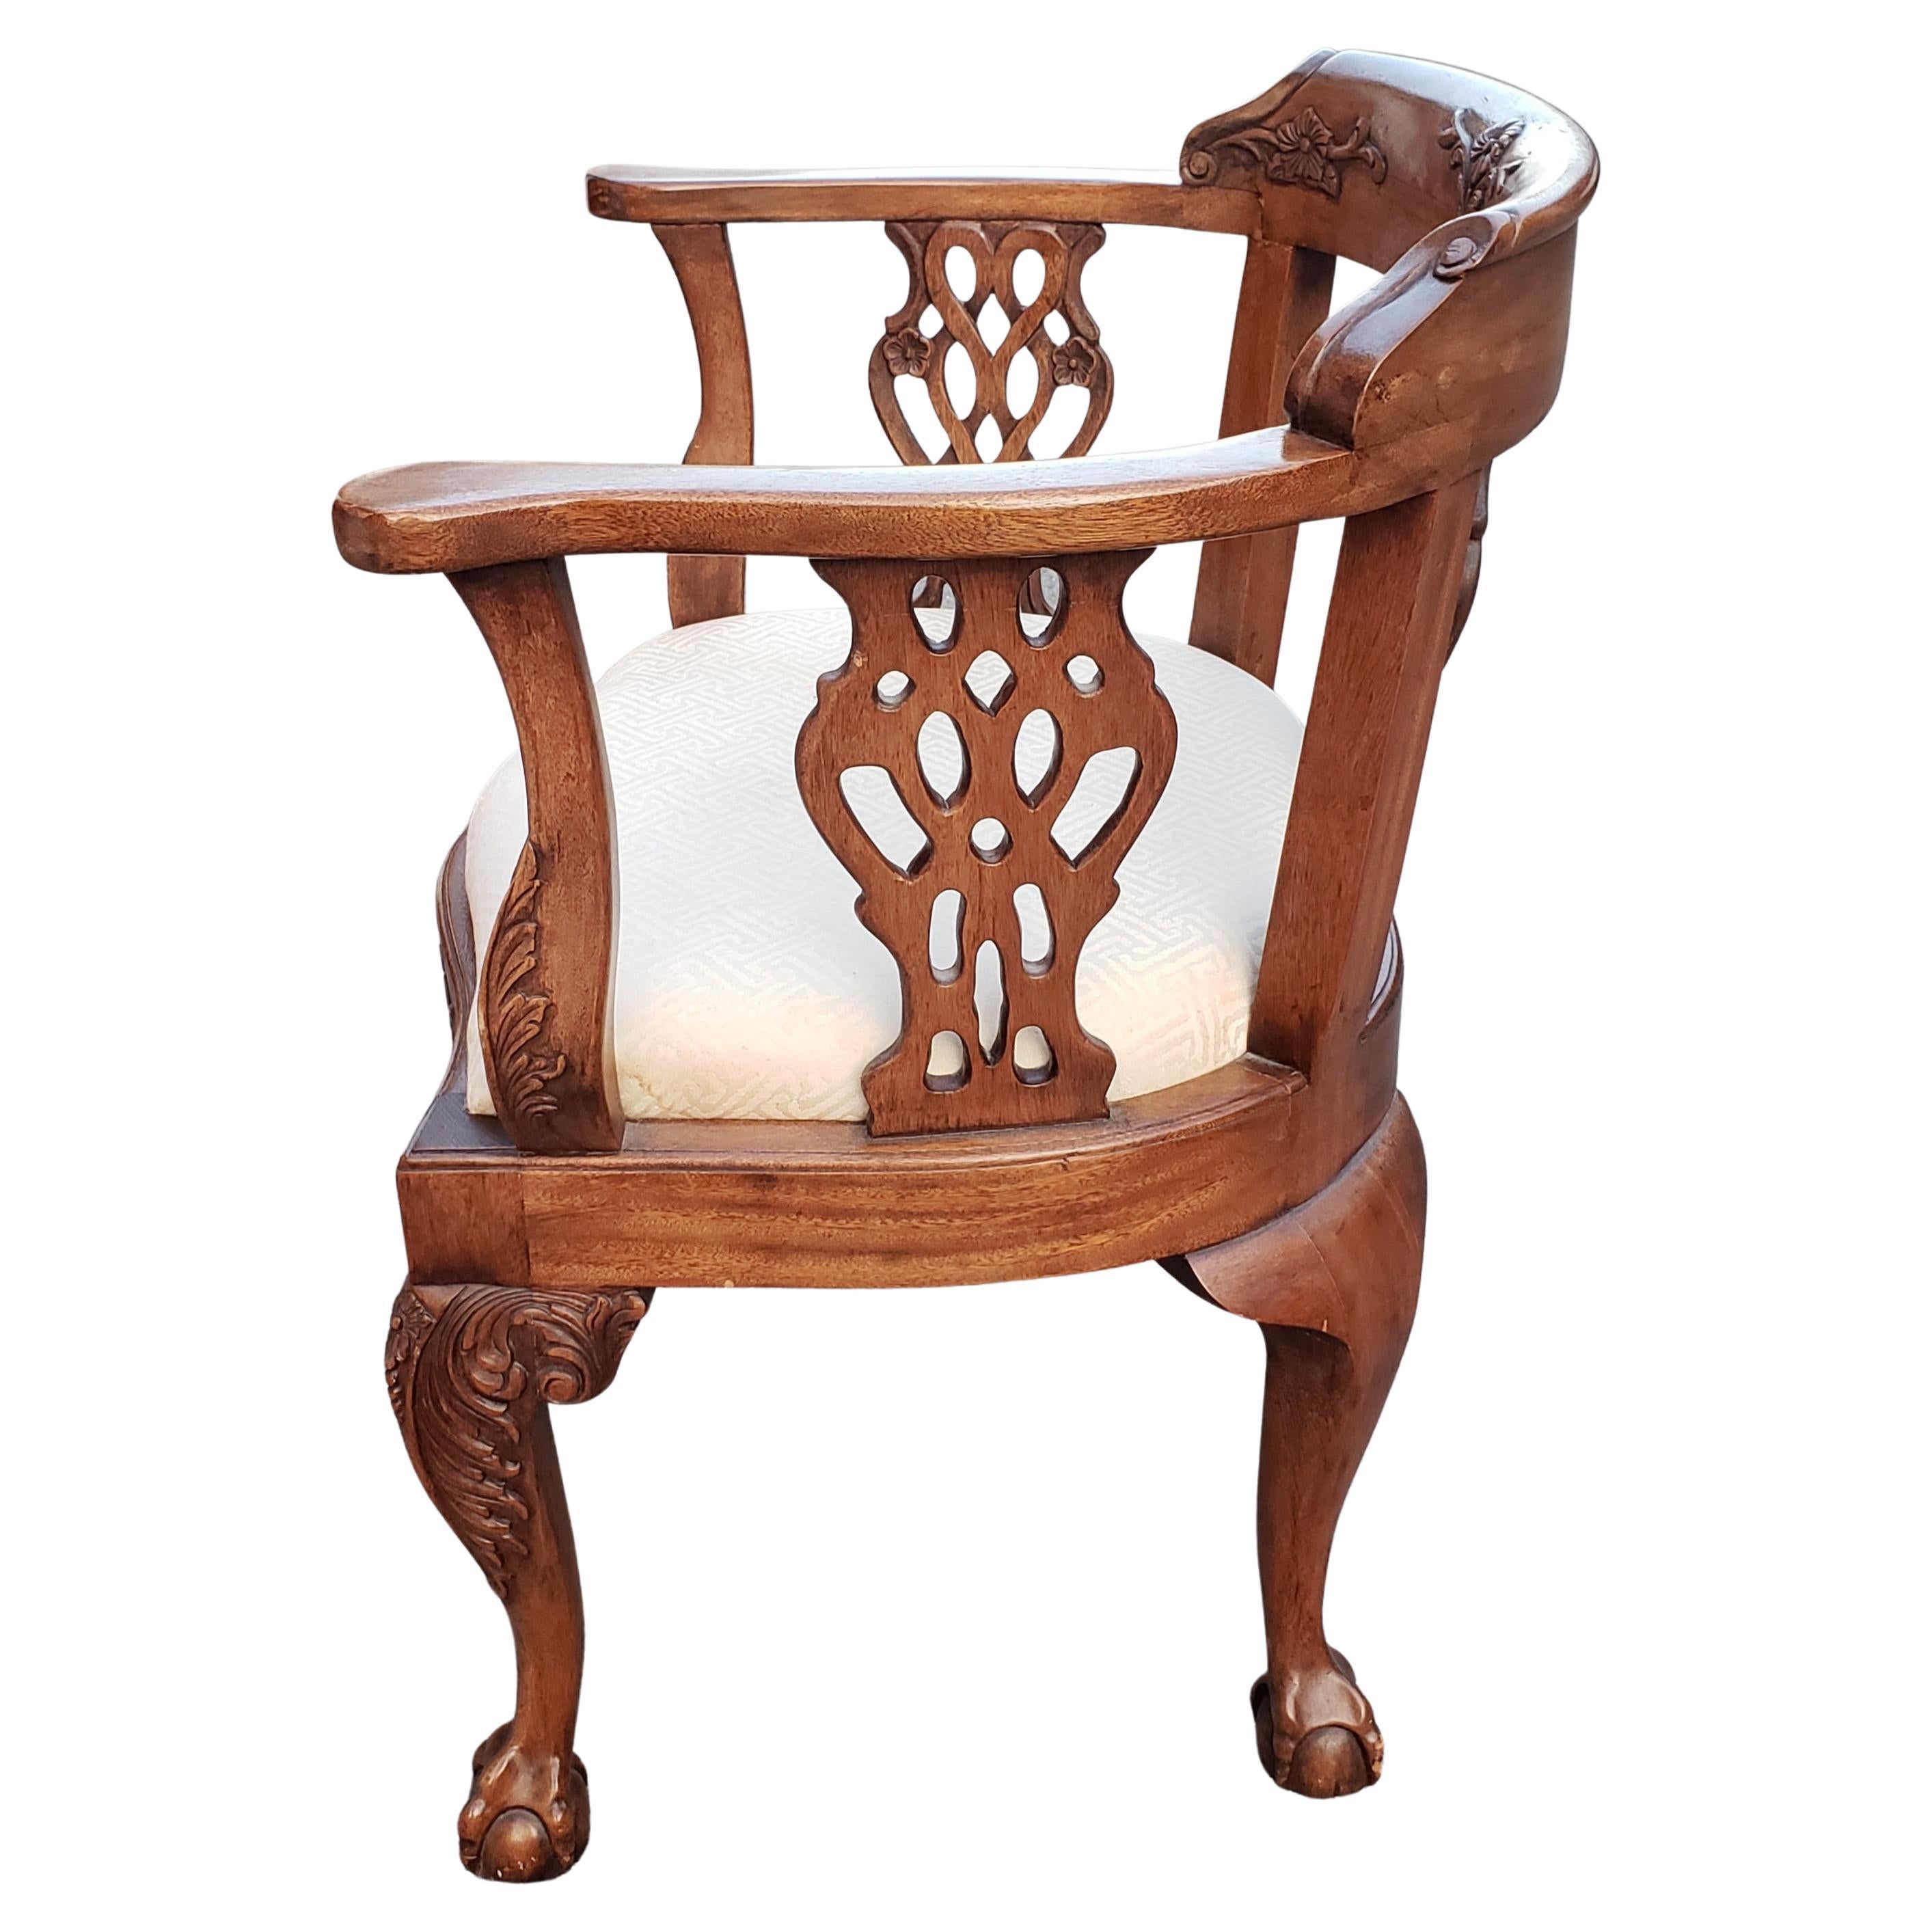 American Georgian Style Heavily Carved Mahogany Arm Chair with Ball and Claw Feet